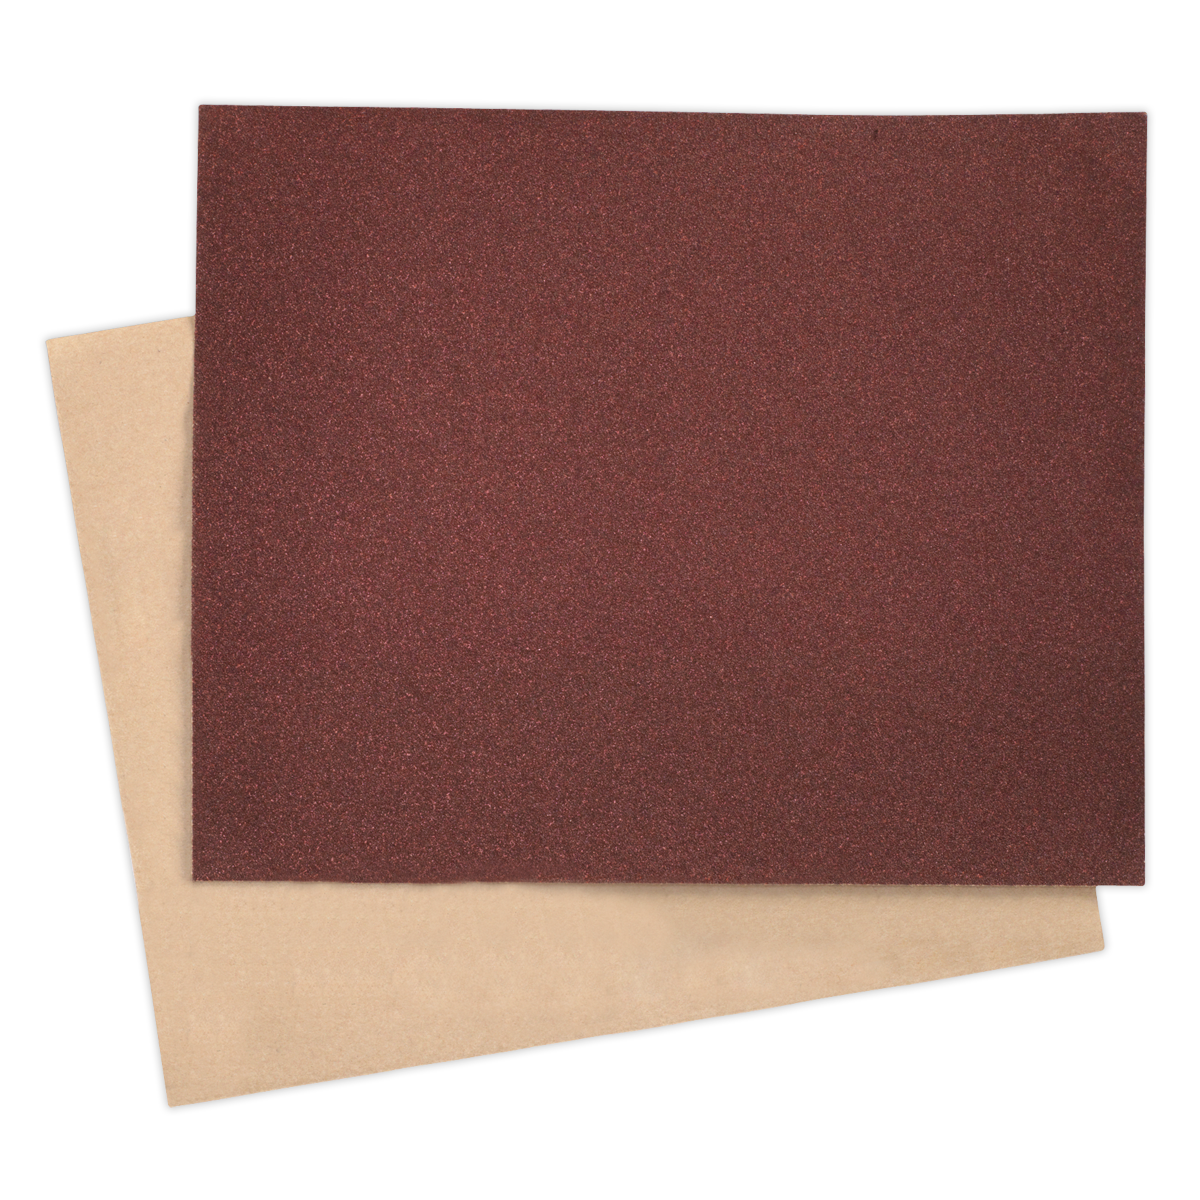 Sealey Production Paper 230 x 280mm 40Grit Pack of 25